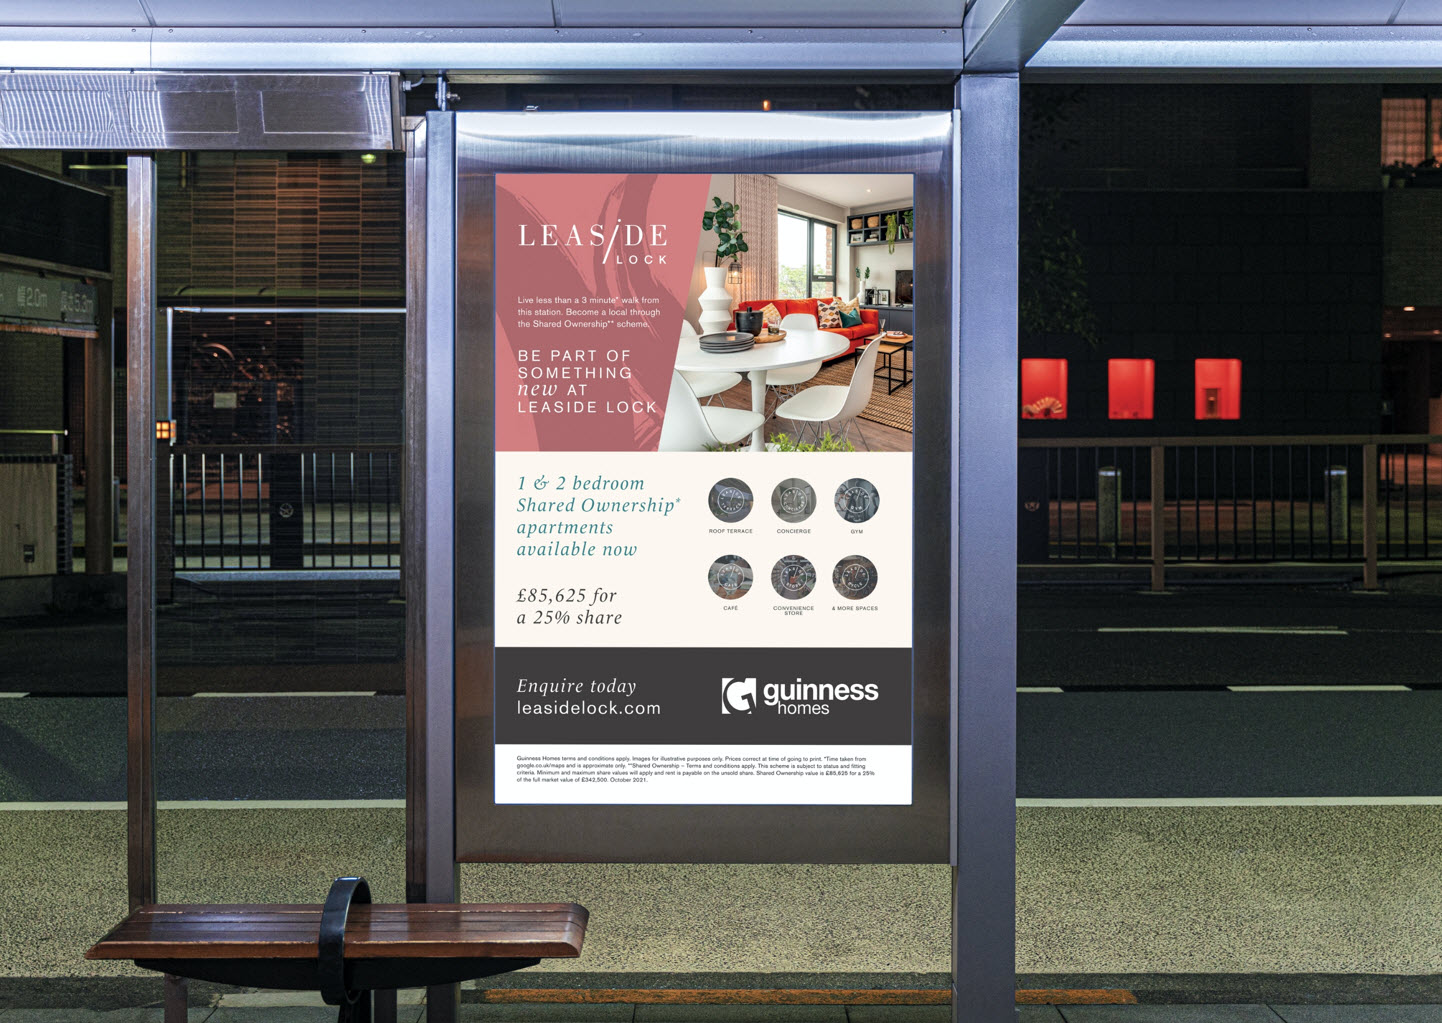 A bus stop advertisement poster that showcases a new property development by Guinness Homes